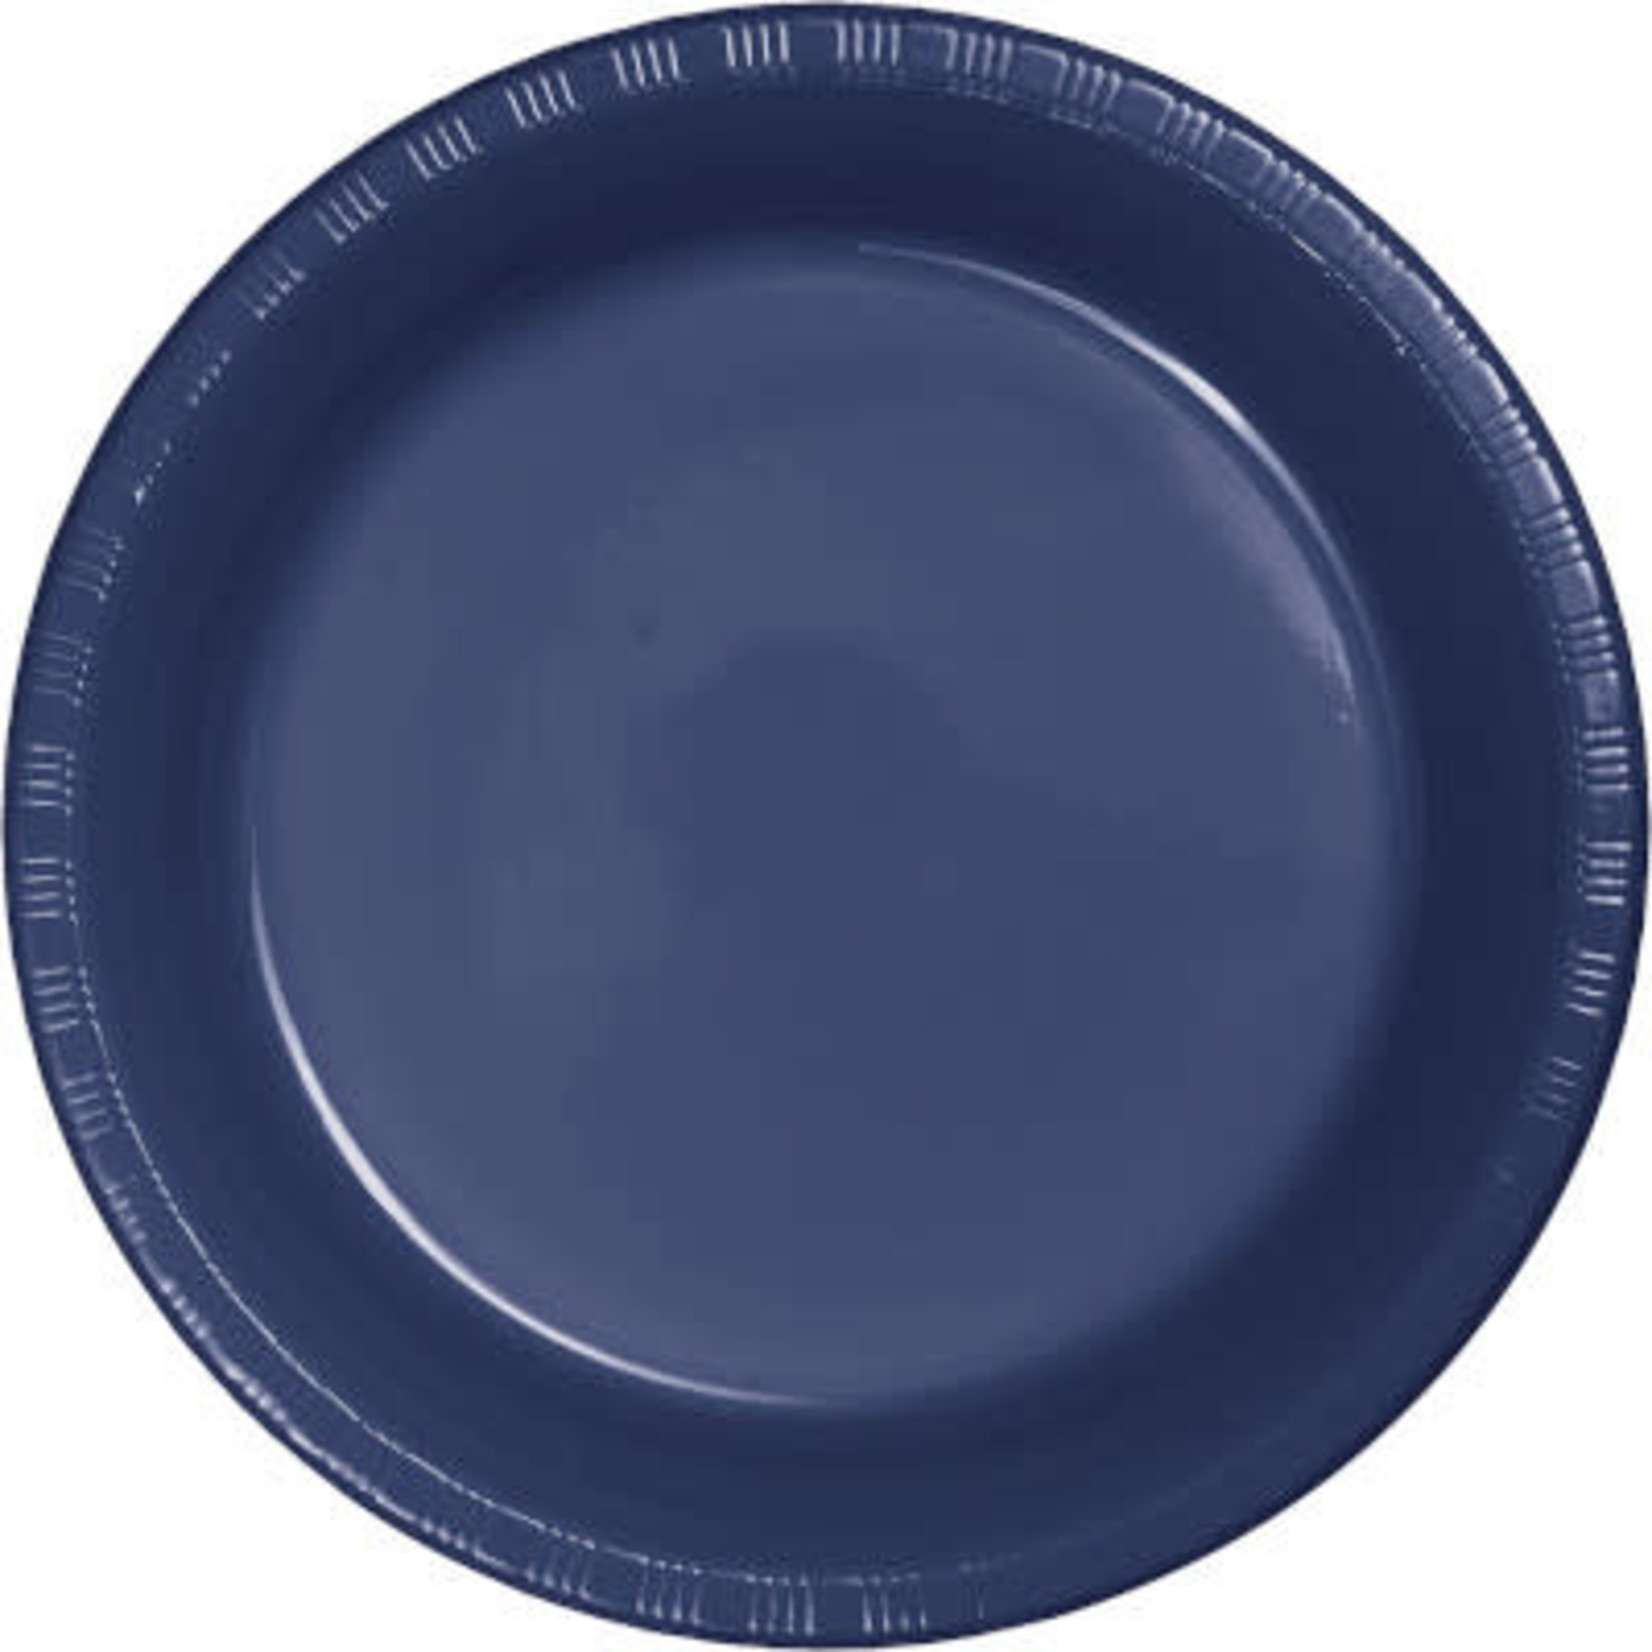 Touch of Color 7" Navy Blue Paper Plates - 24ct.